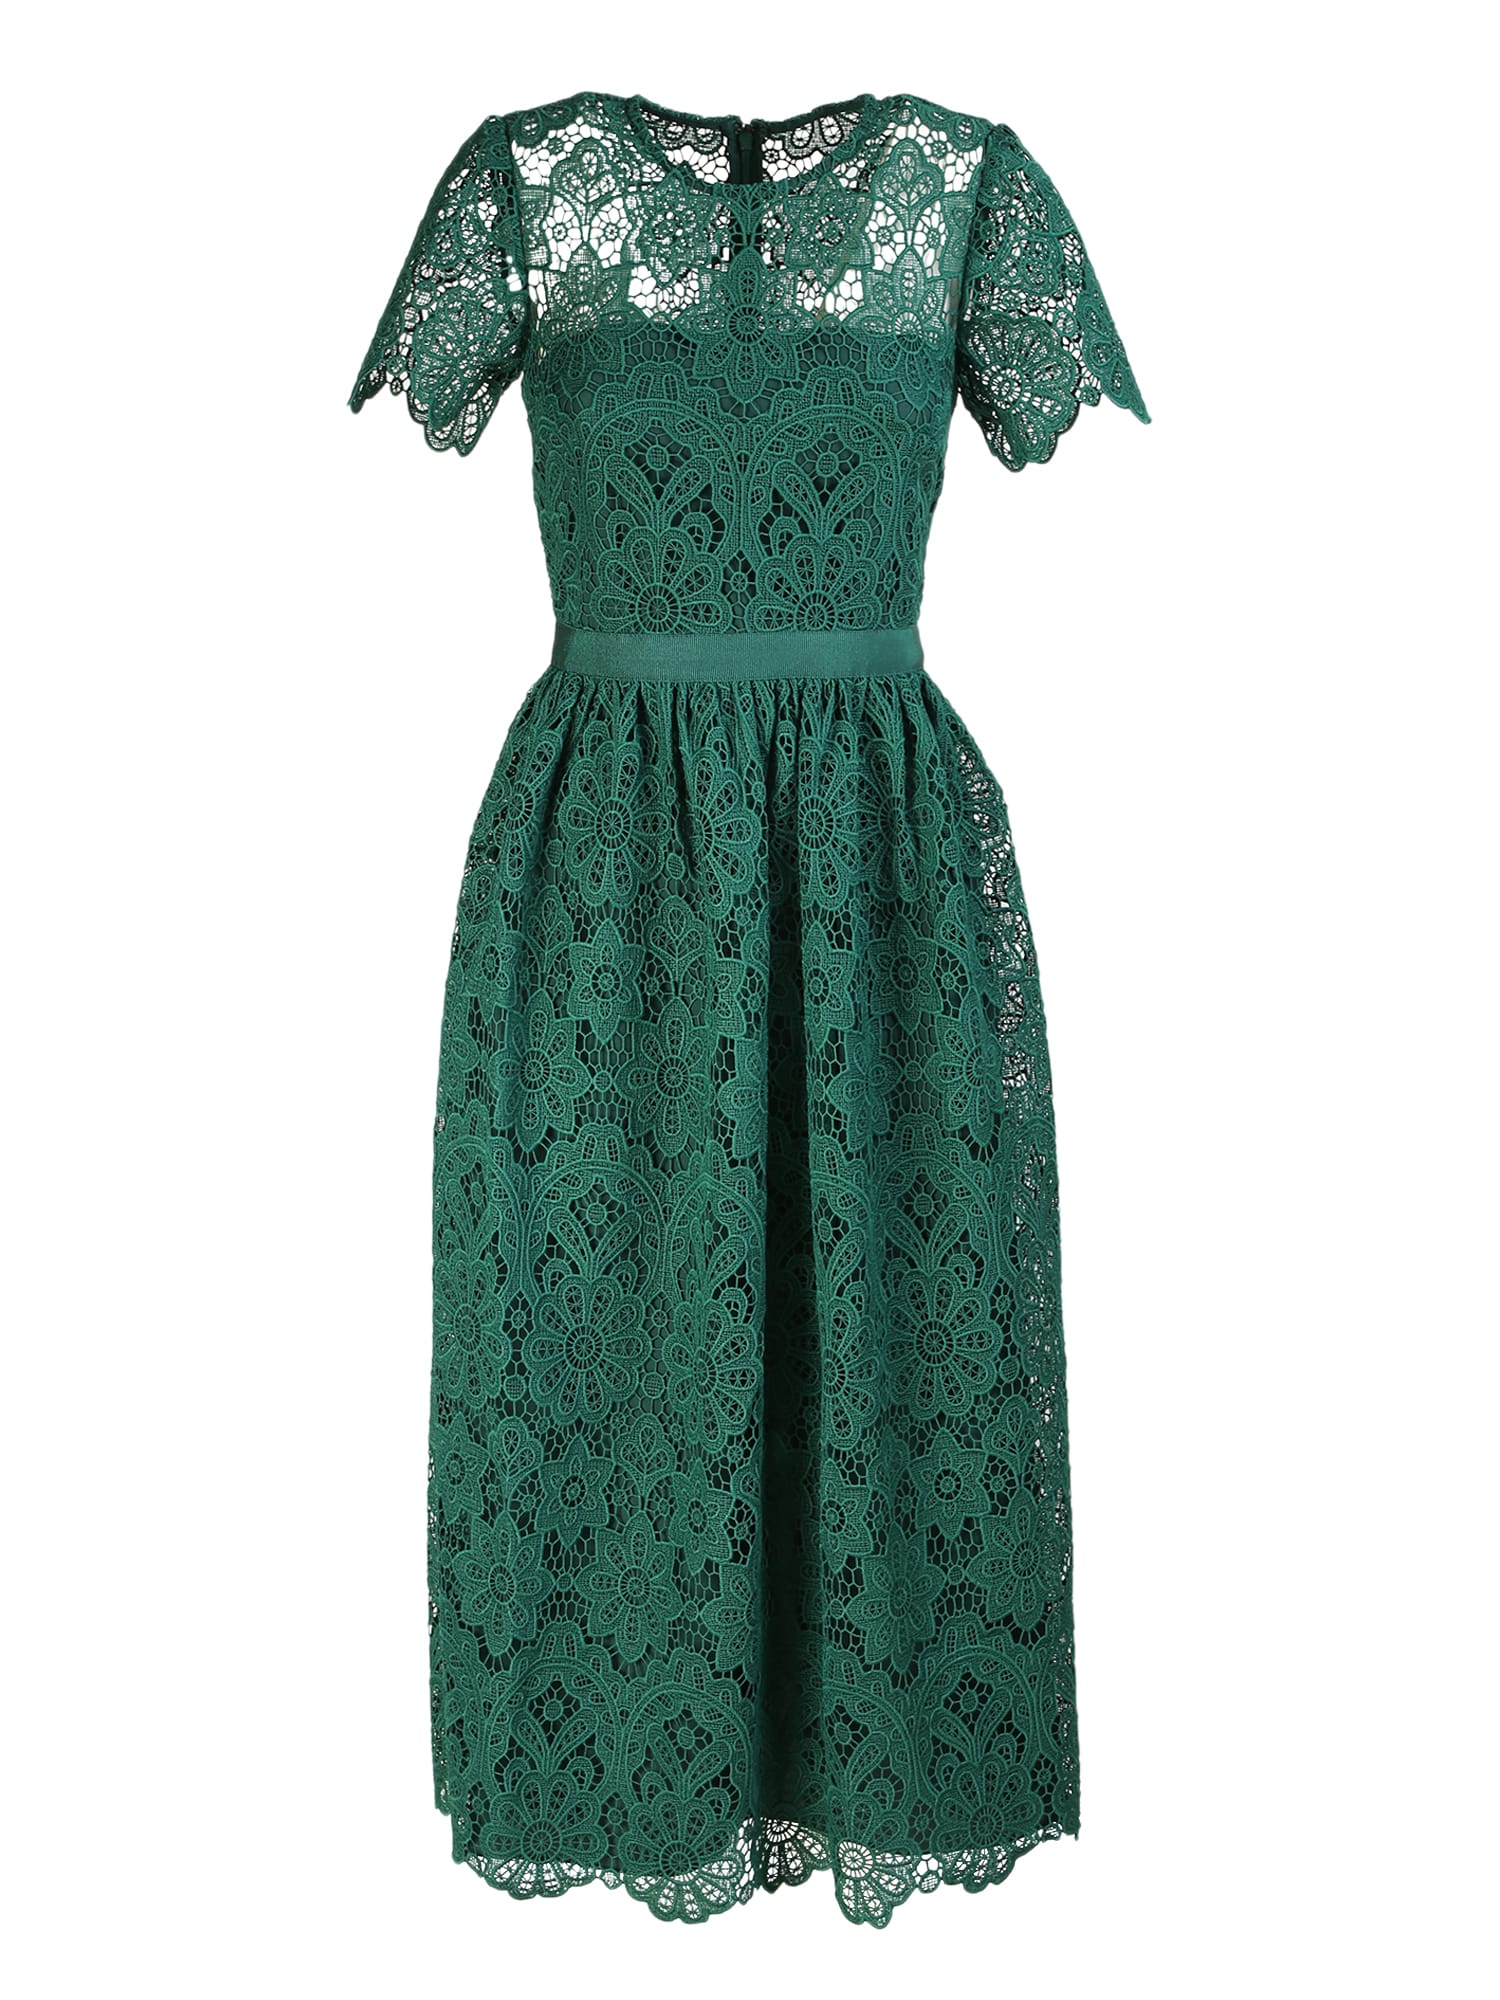 Self-portrait Blends Romance And Sophistication With This Guipure Lace Midi Dress